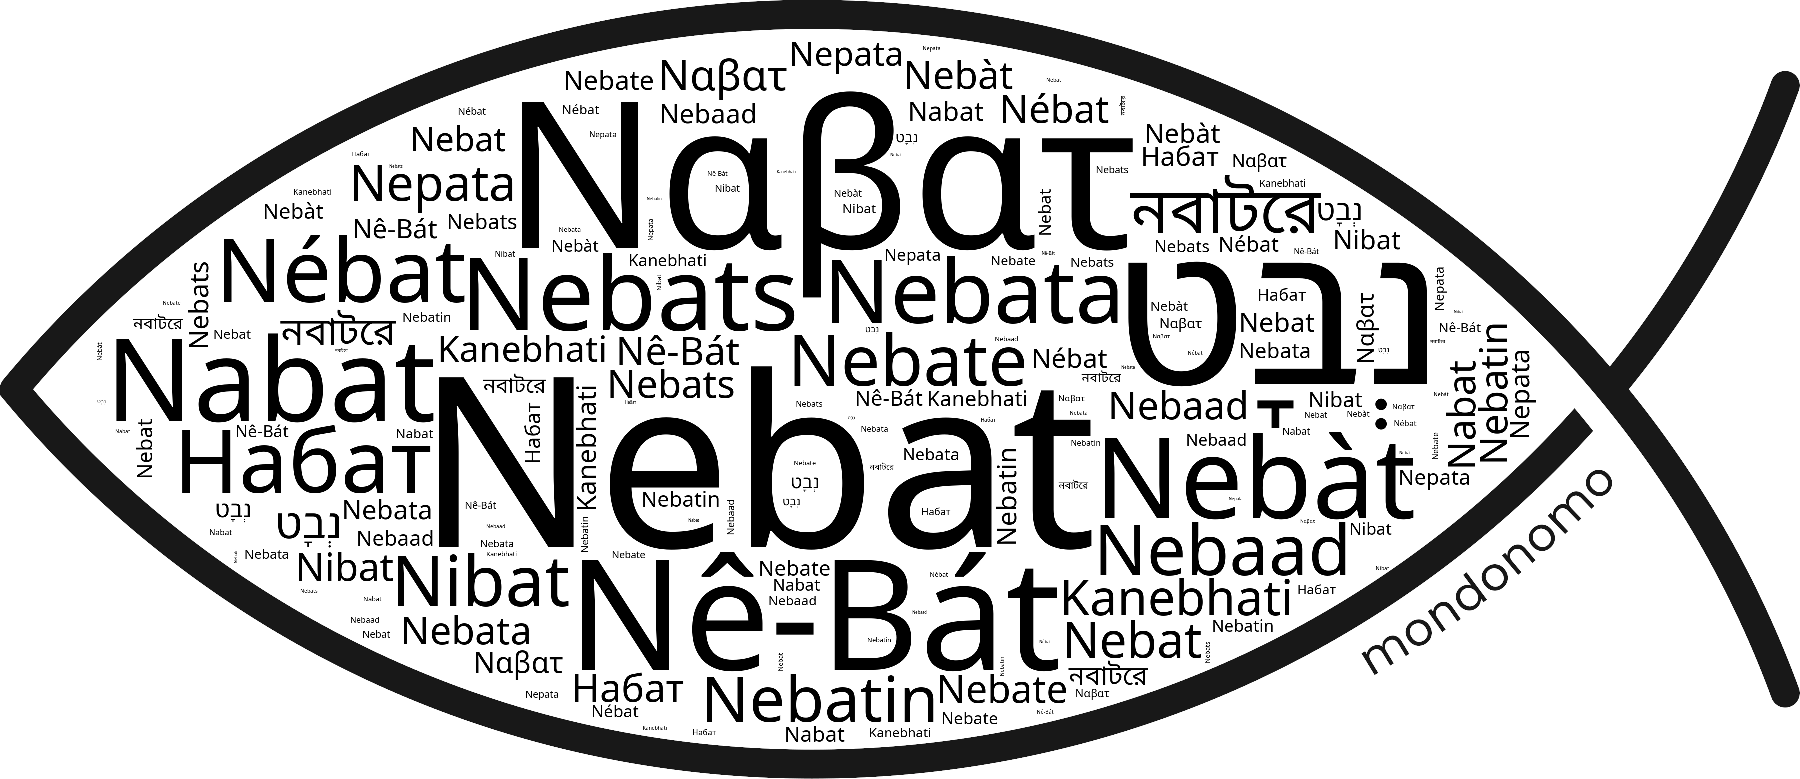 Name Nebat in the world's Bibles